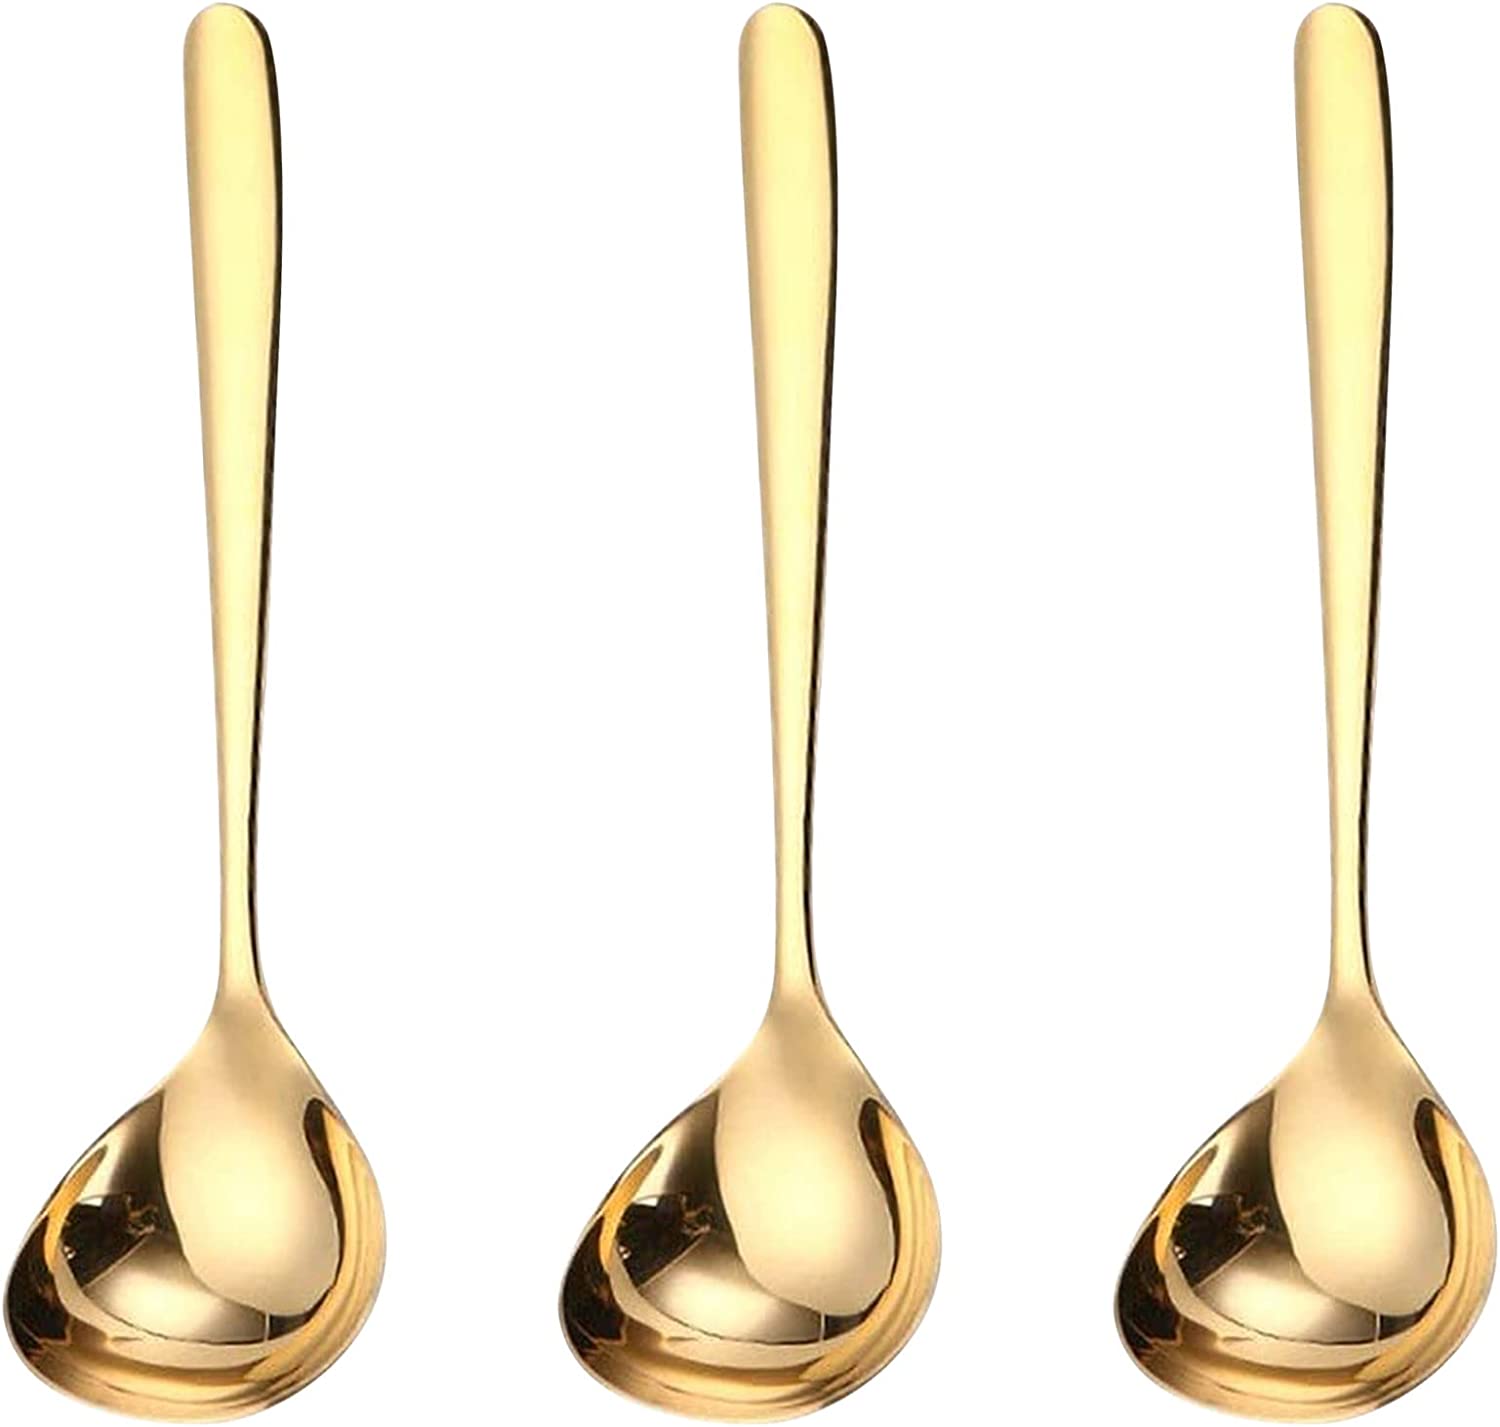 Mini Ice Scoop Set of 4, E-far 3 Ounce Gold Stainless Steel Scoops